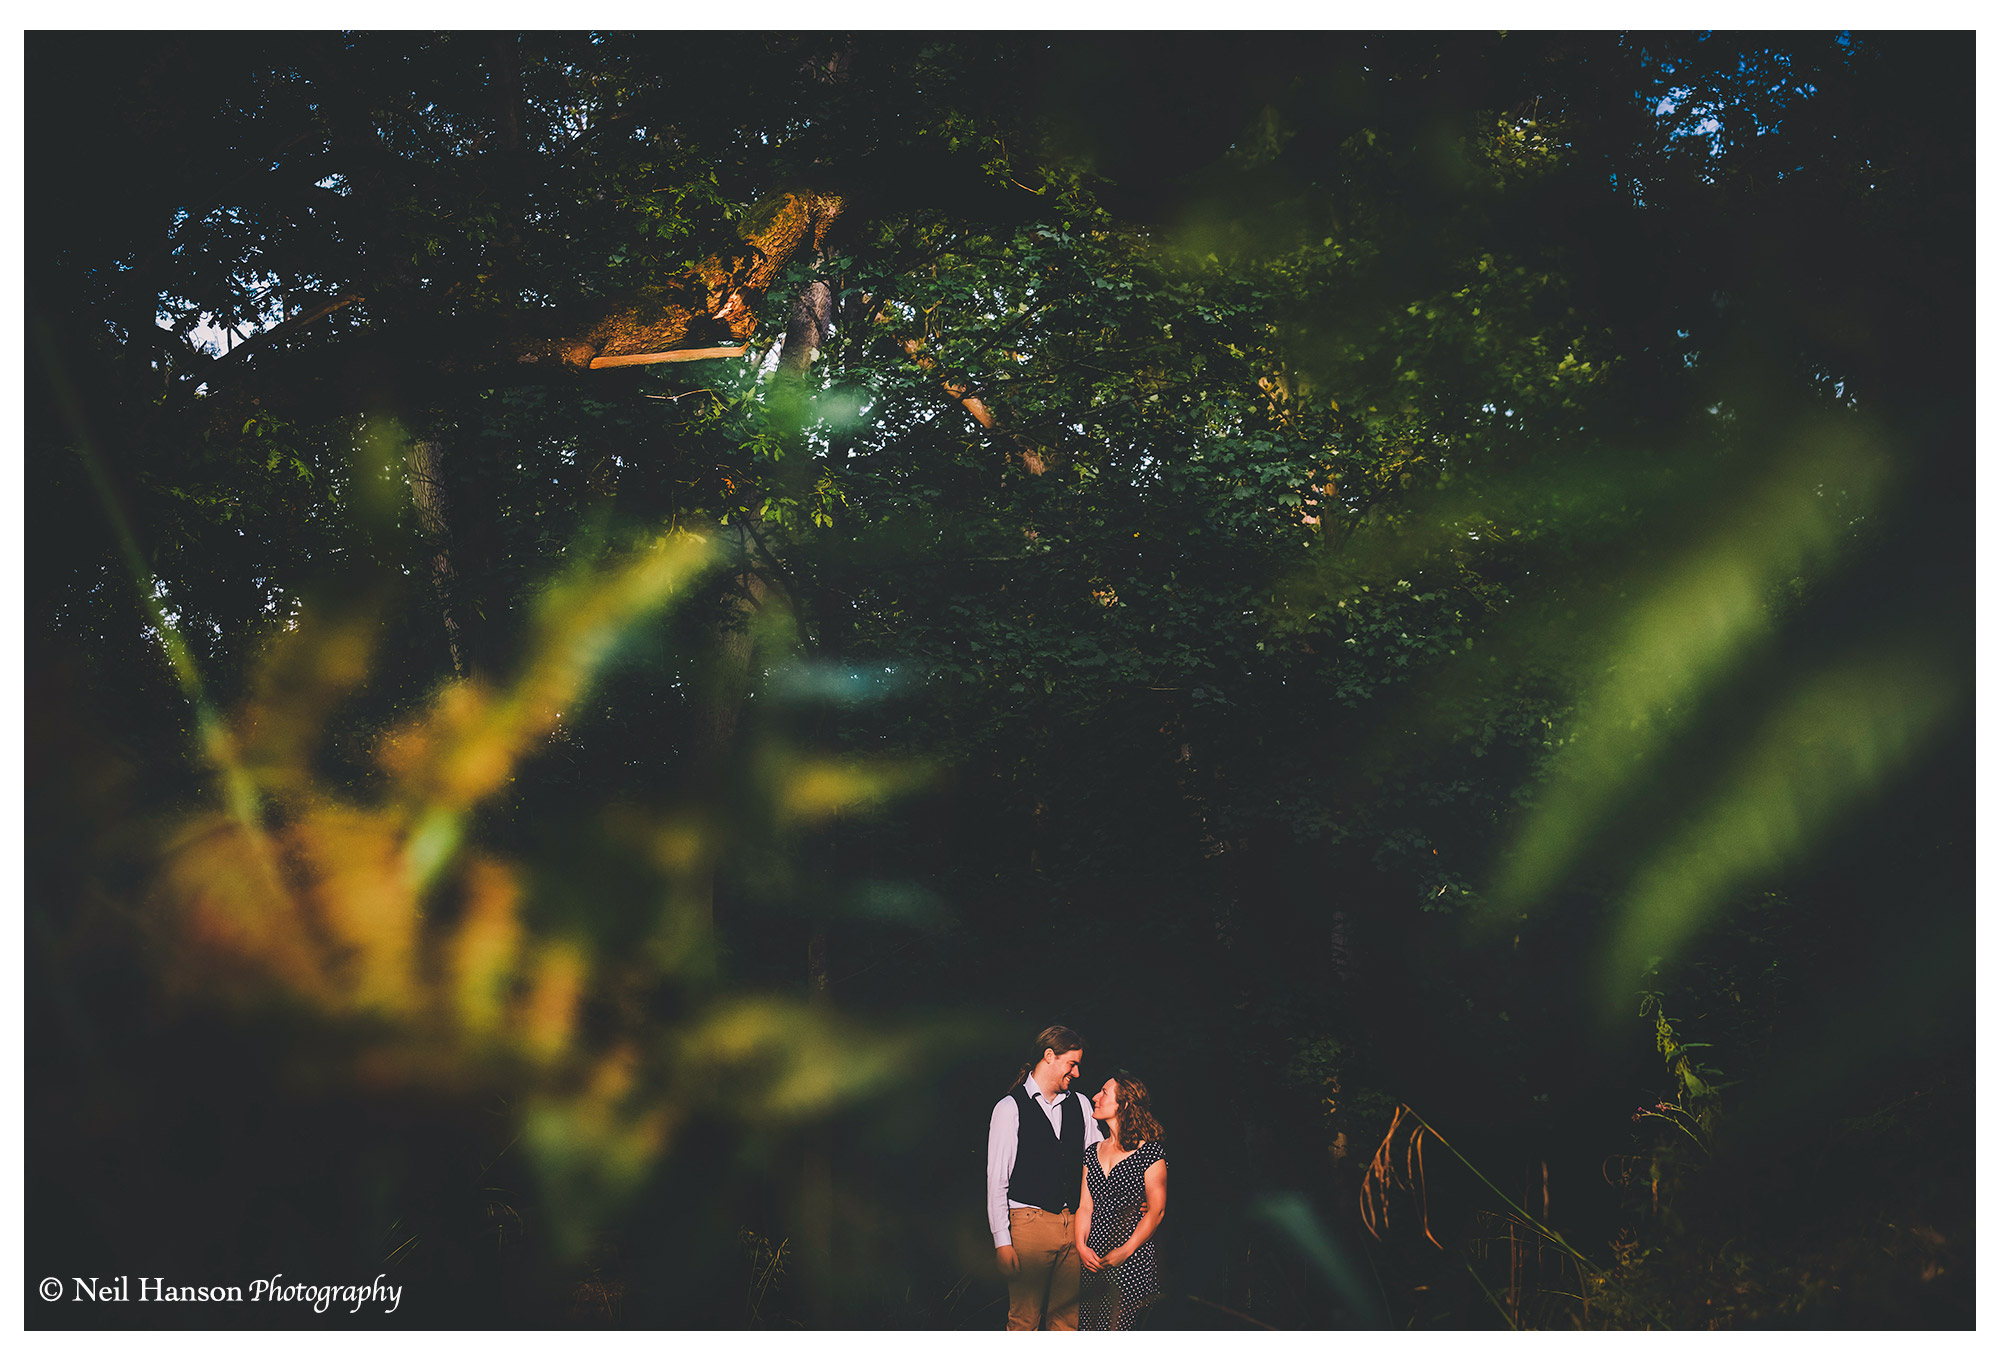 Evening sunlight on a pre-wedding photoshoot in Oxford